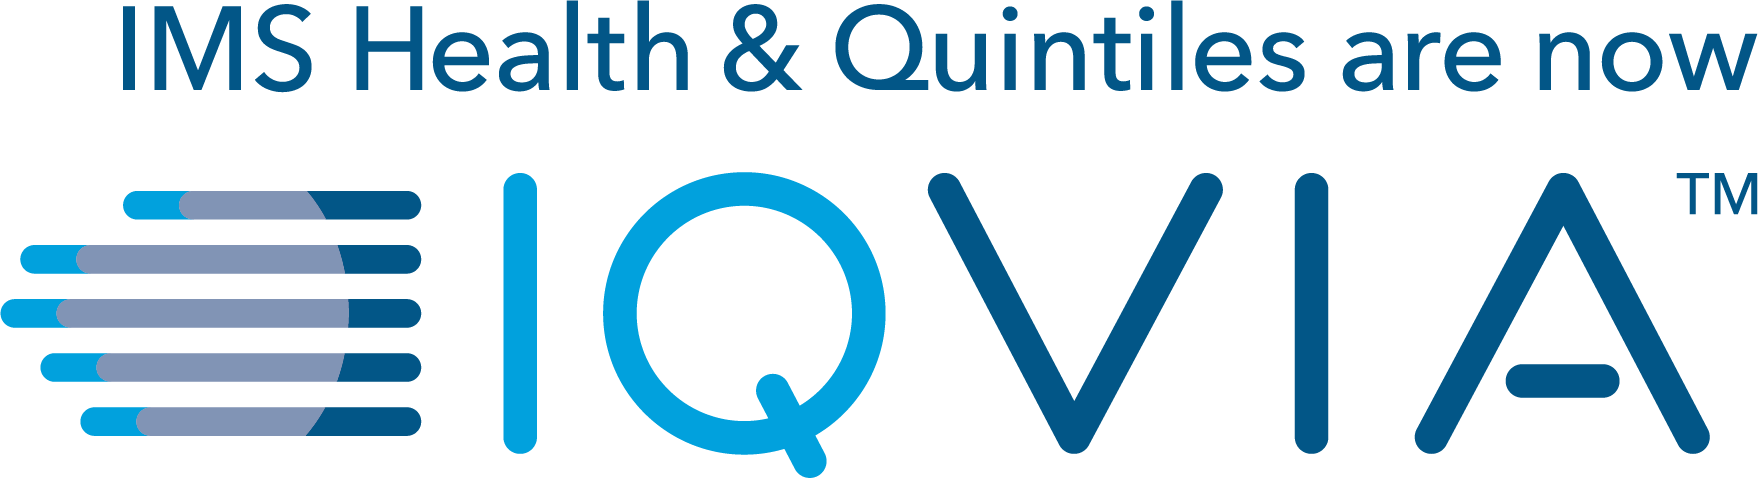 Iqvia And Statfinn And Epid Research Have Joined Forces - Ims Health And Quintiles Are Now Iqvia (1758x478)